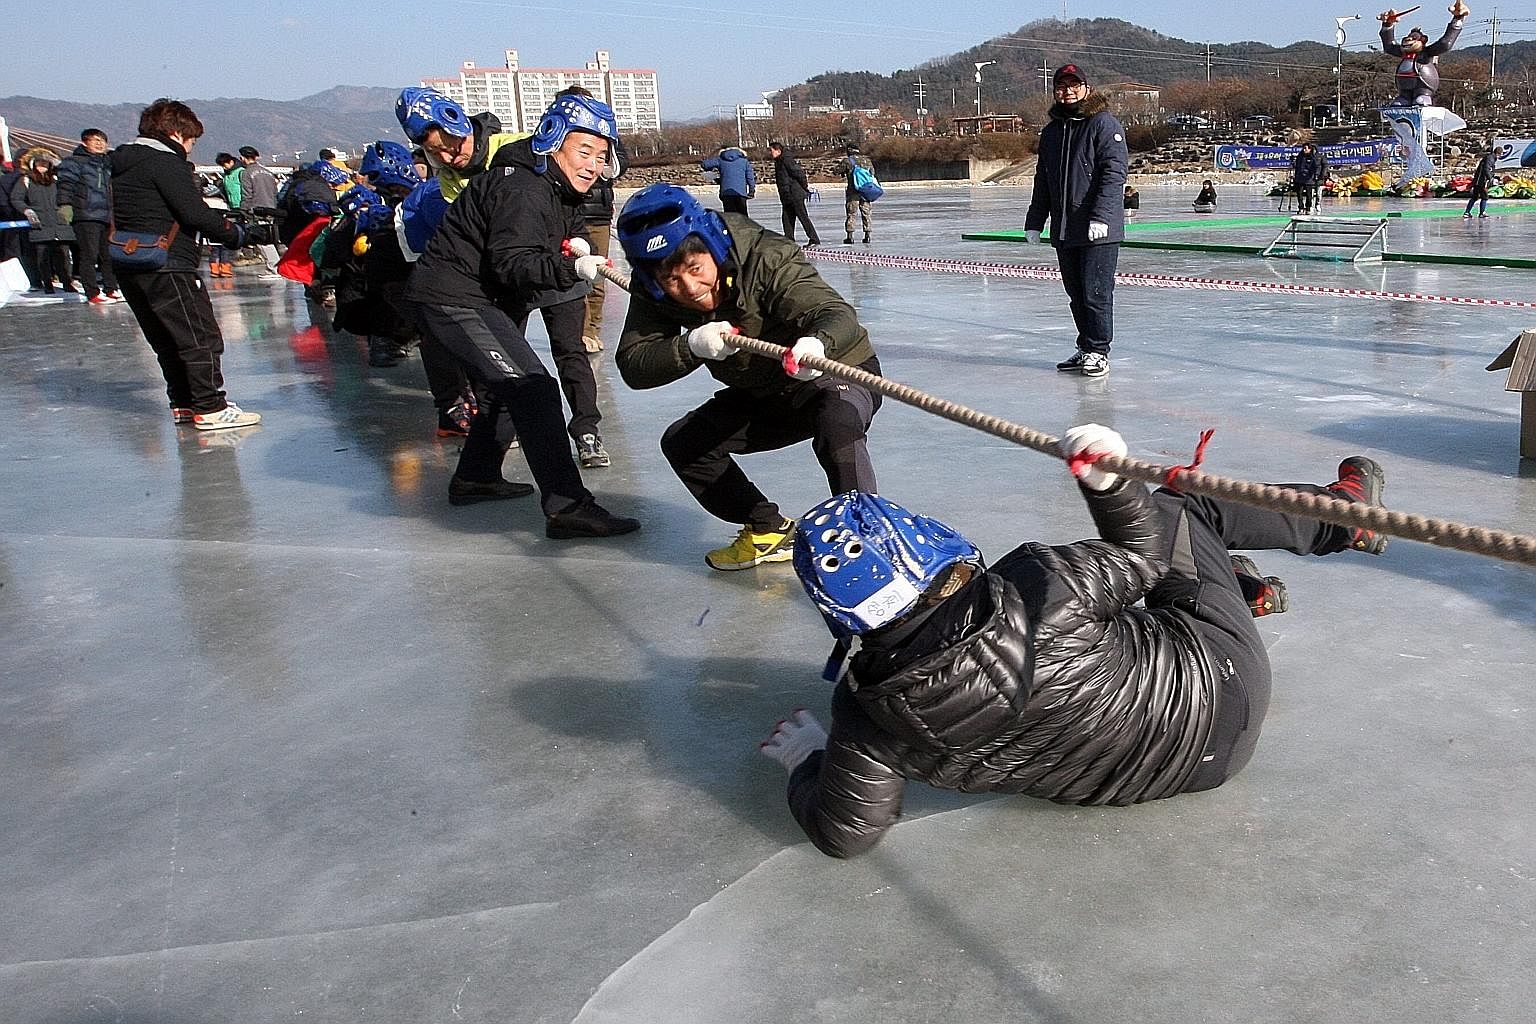 South Koreans enjoying a tug-of-war at a winter festival in Gangwon province over the weekend as the country shivered to a cold wave with temperatures dropping to as low as -20 deg C.